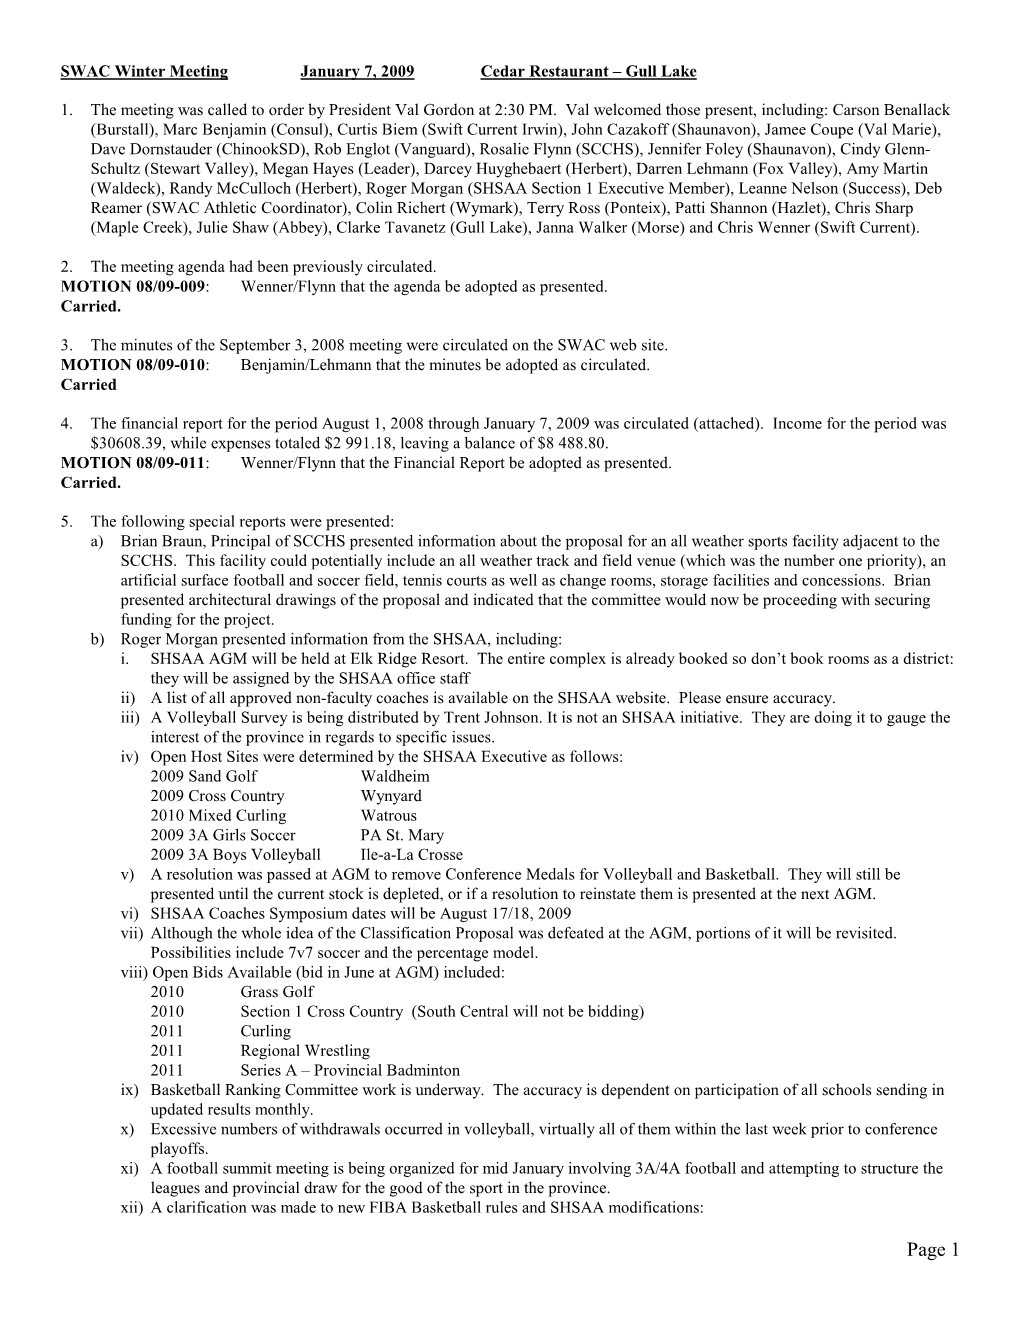 SWAC Winter Meeting Minutes January 7 2009